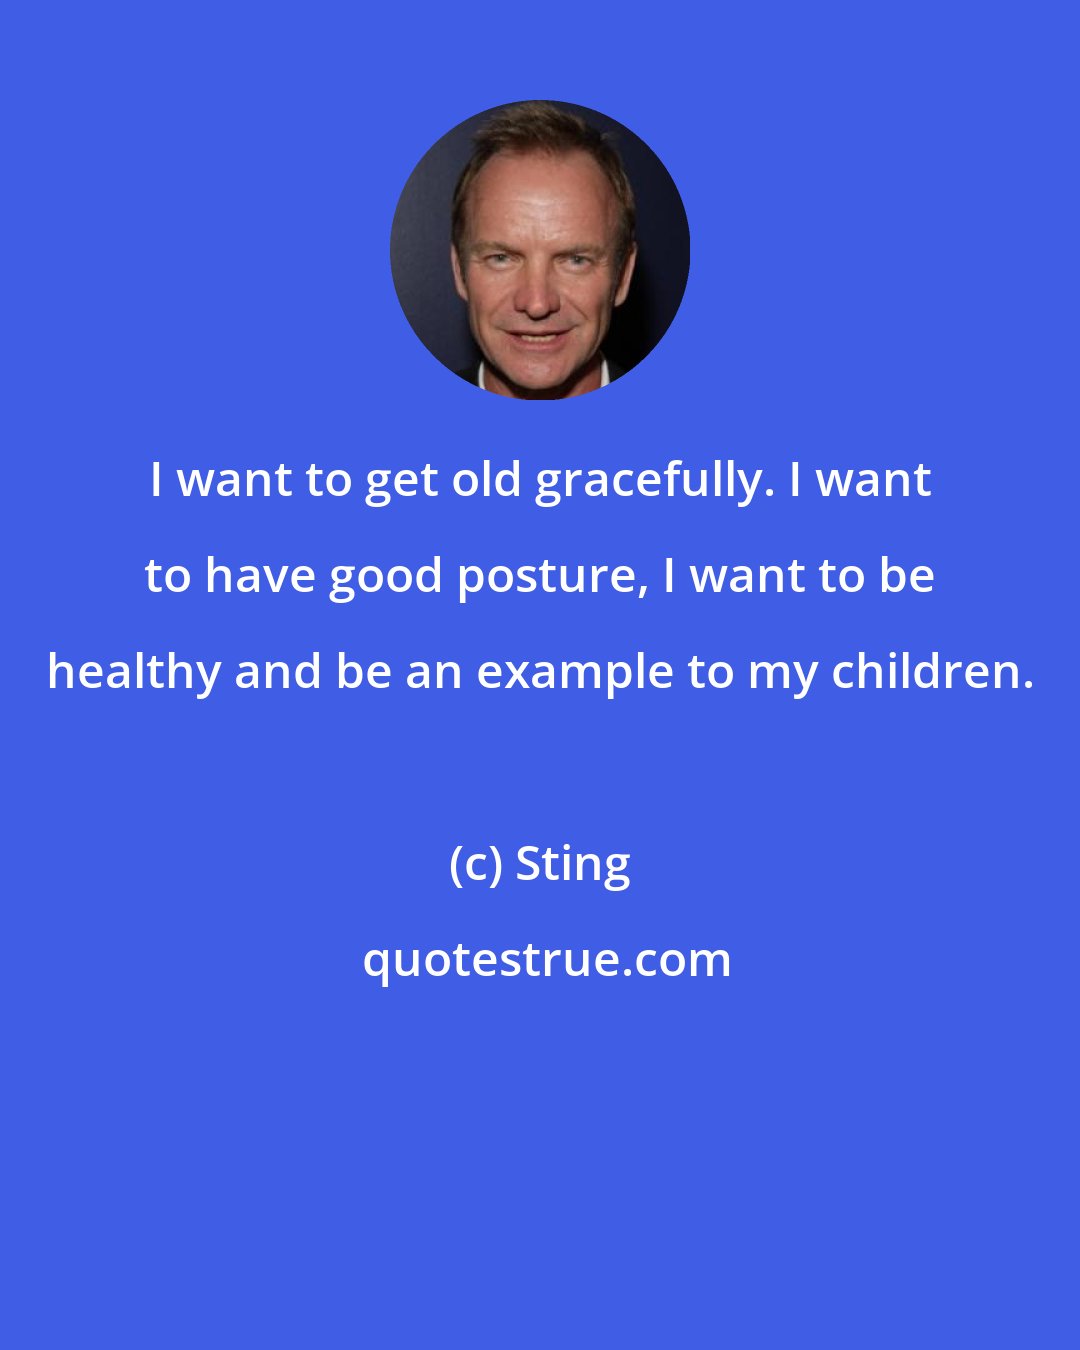 Sting: I want to get old gracefully. I want to have good posture, I want to be healthy and be an example to my children.